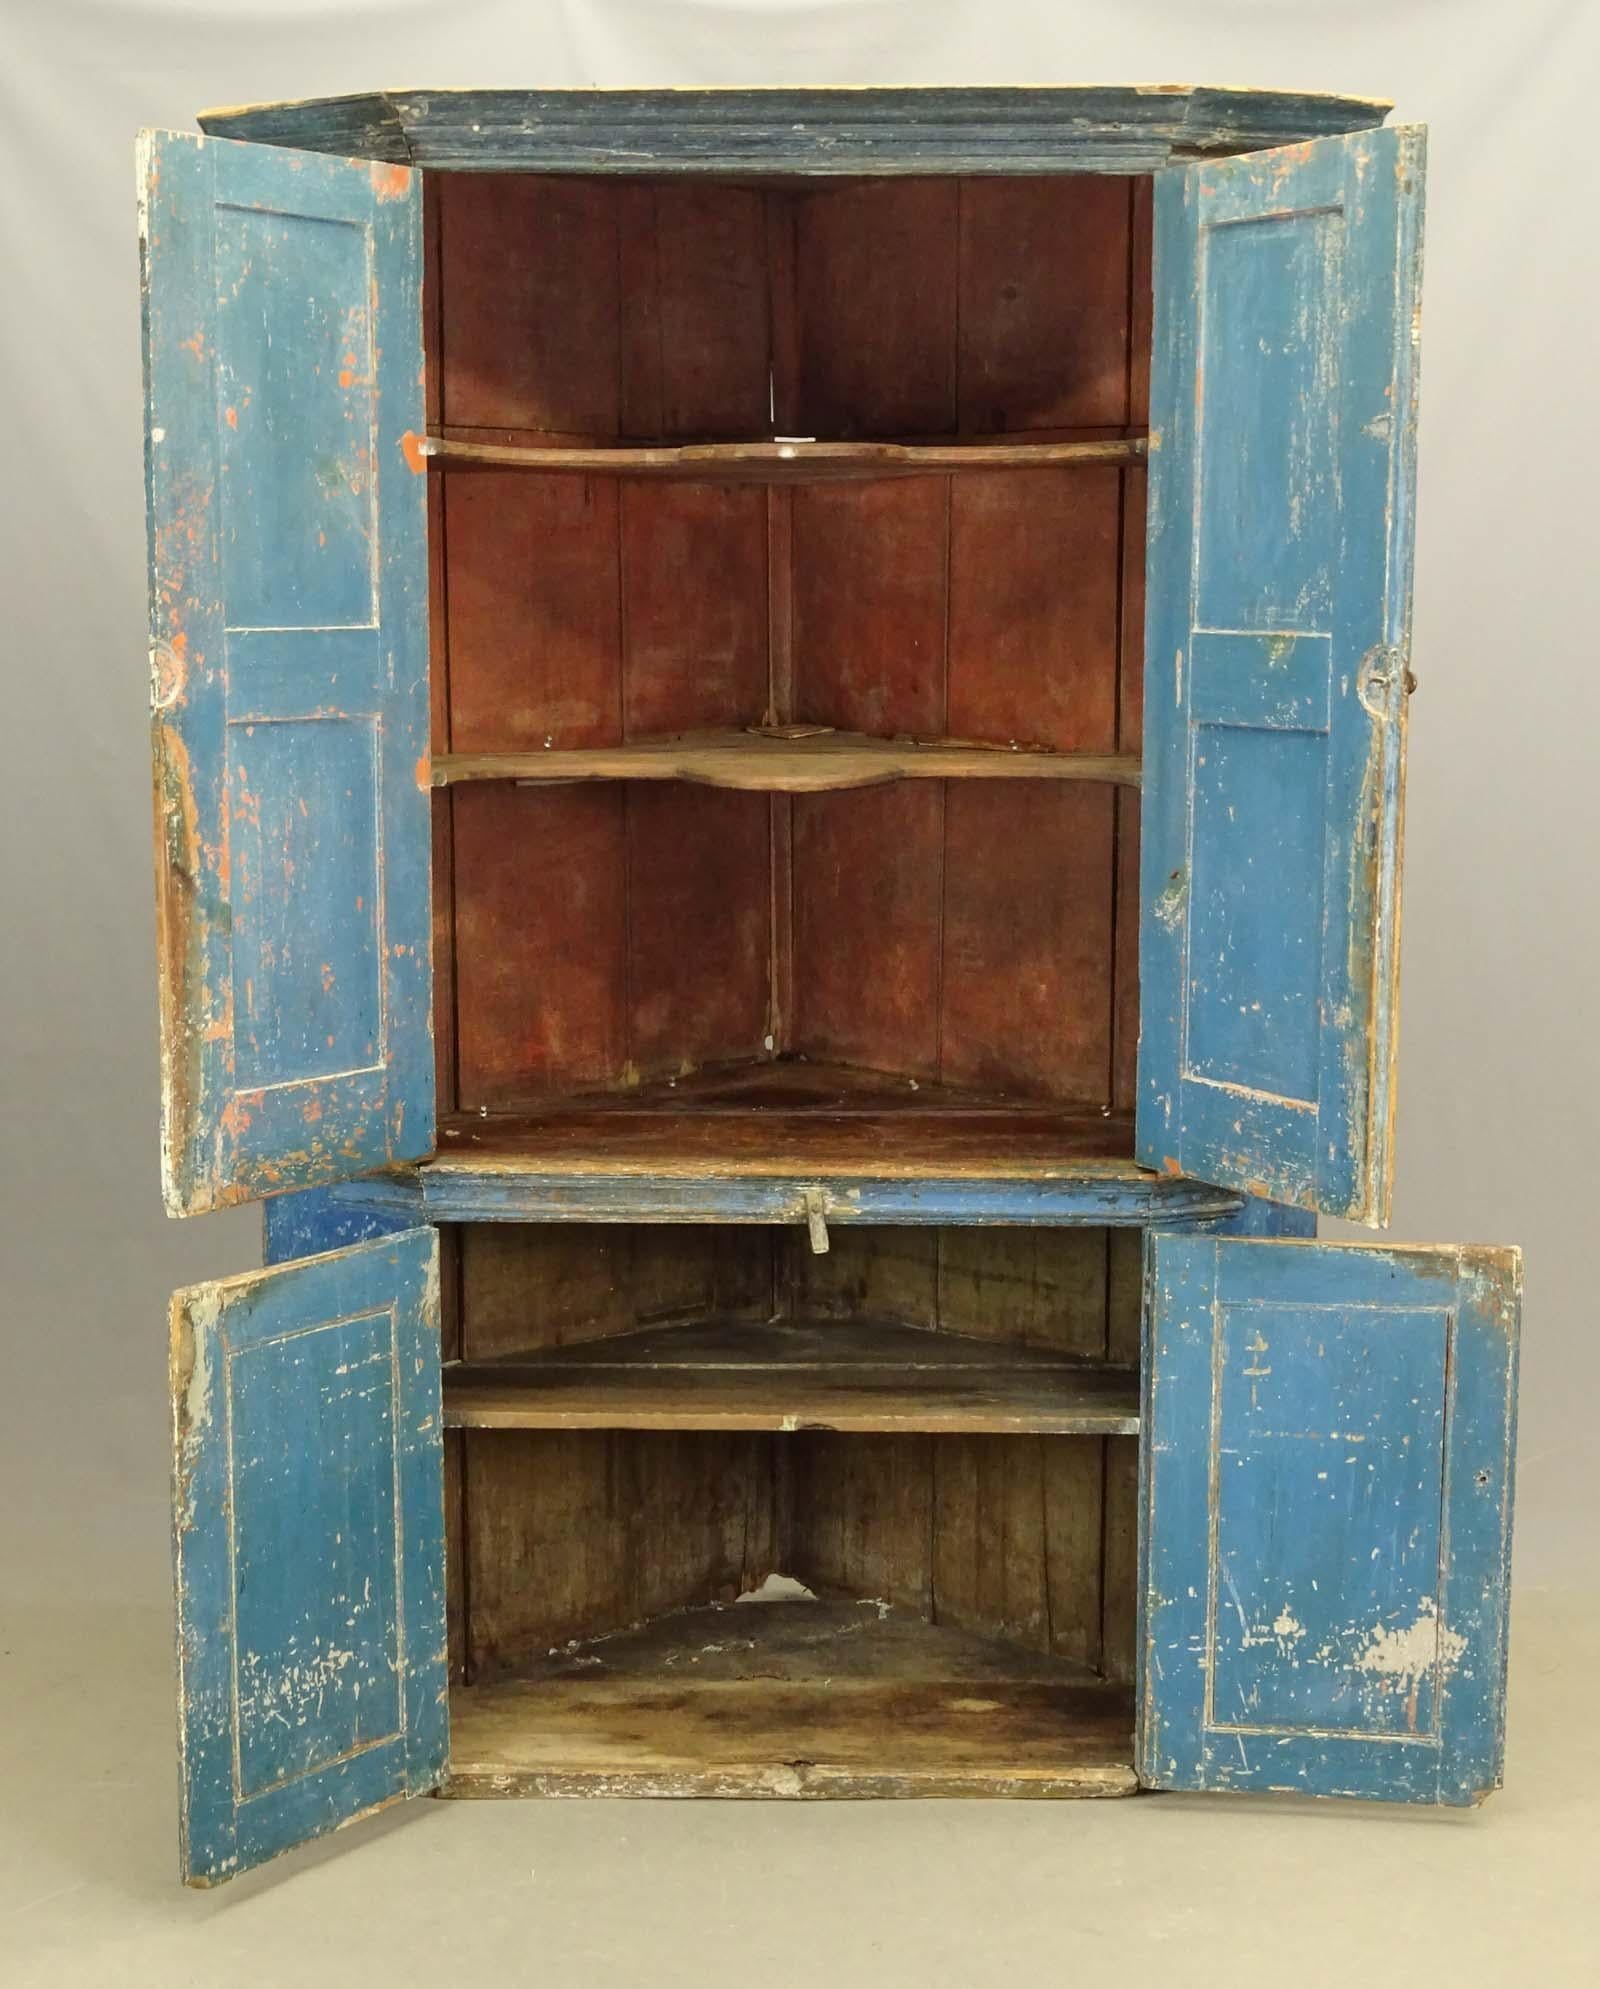 Rare large 19th century Hudson Valley corner cupboard in old blue paint. It can easily be mistaken for 
a Swedish Baroque, 18th century cabinet / cupboard or will work well in Gustavian, French, country decor or large contemporary great room. This